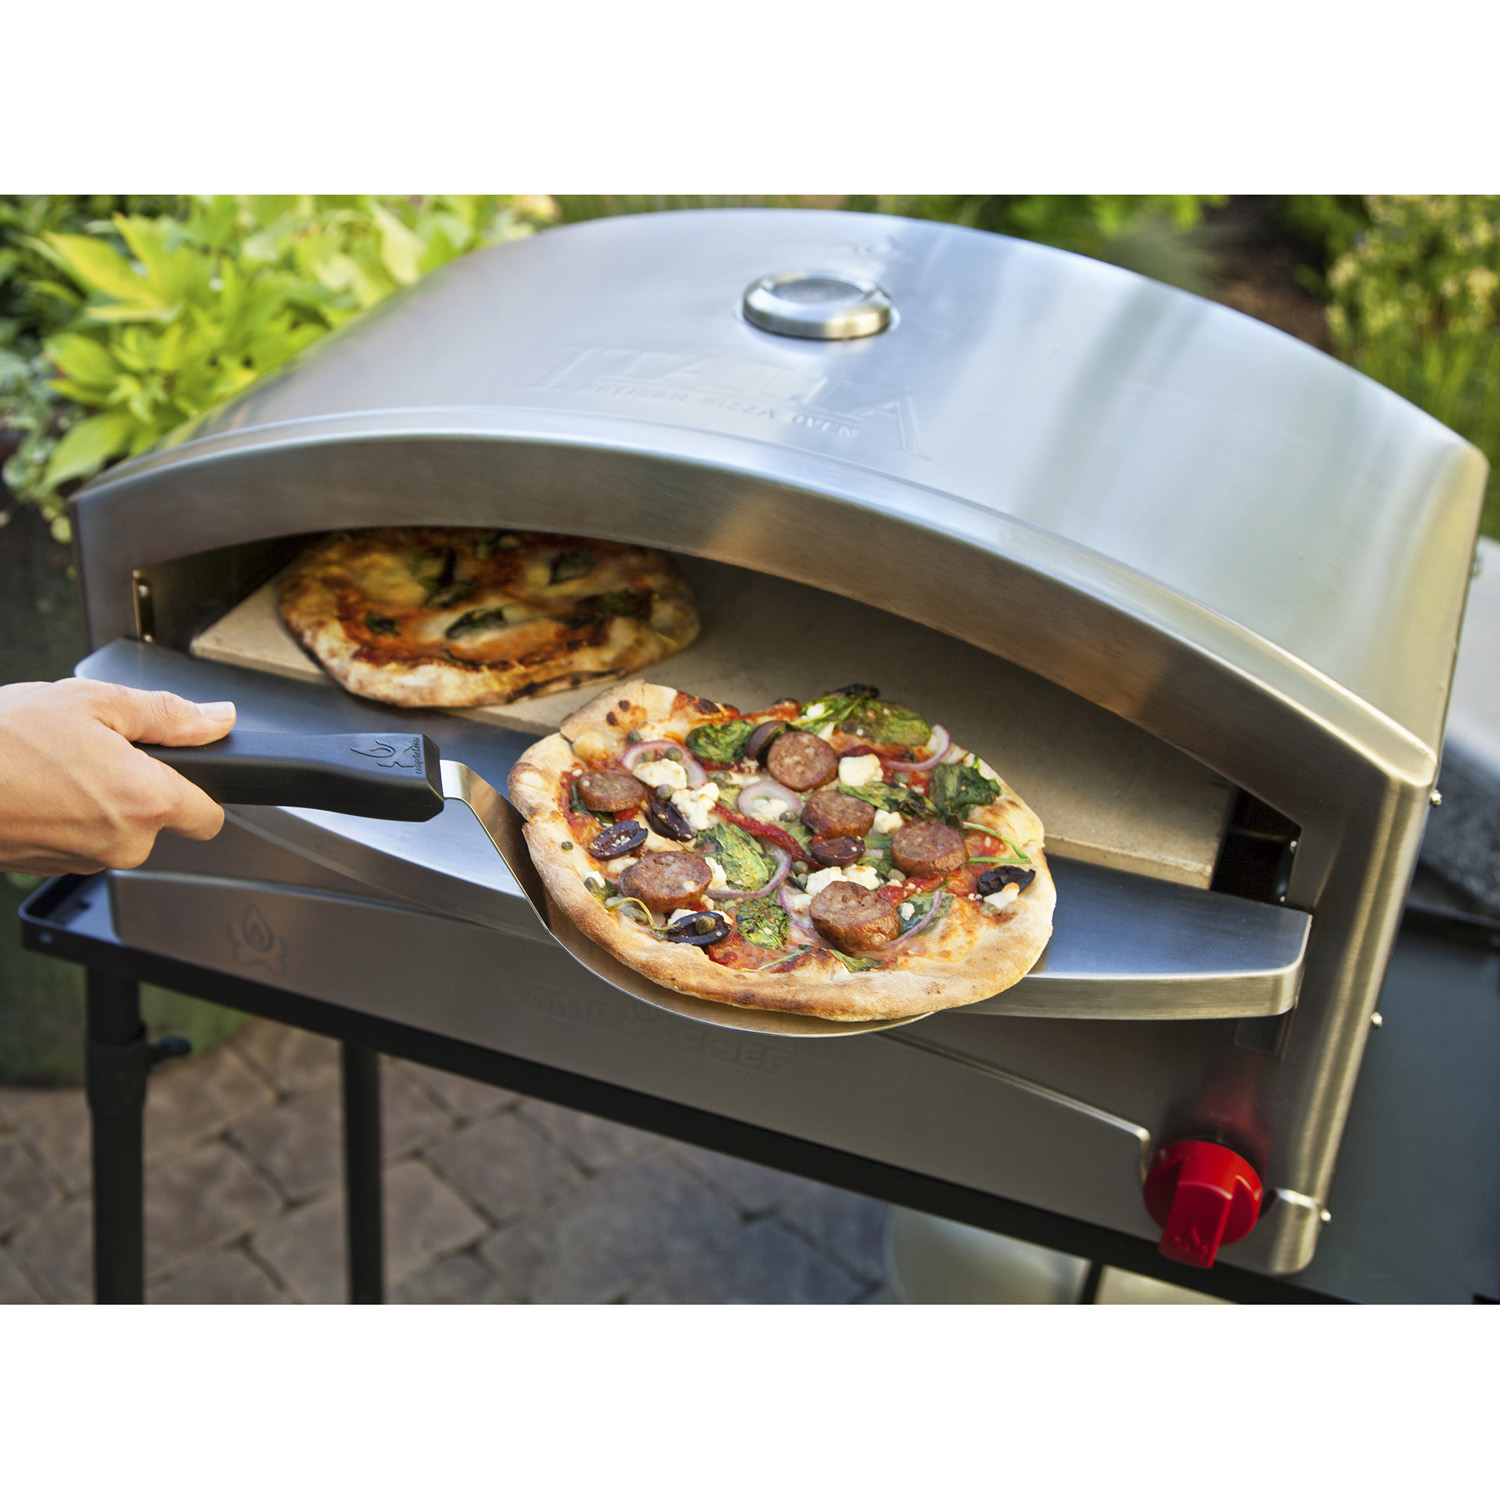 Camp Chef Italia Artisan Pizza Oven, PZOVEN, Stainless Steel Propane Outdoor Cooker - image 1 of 5